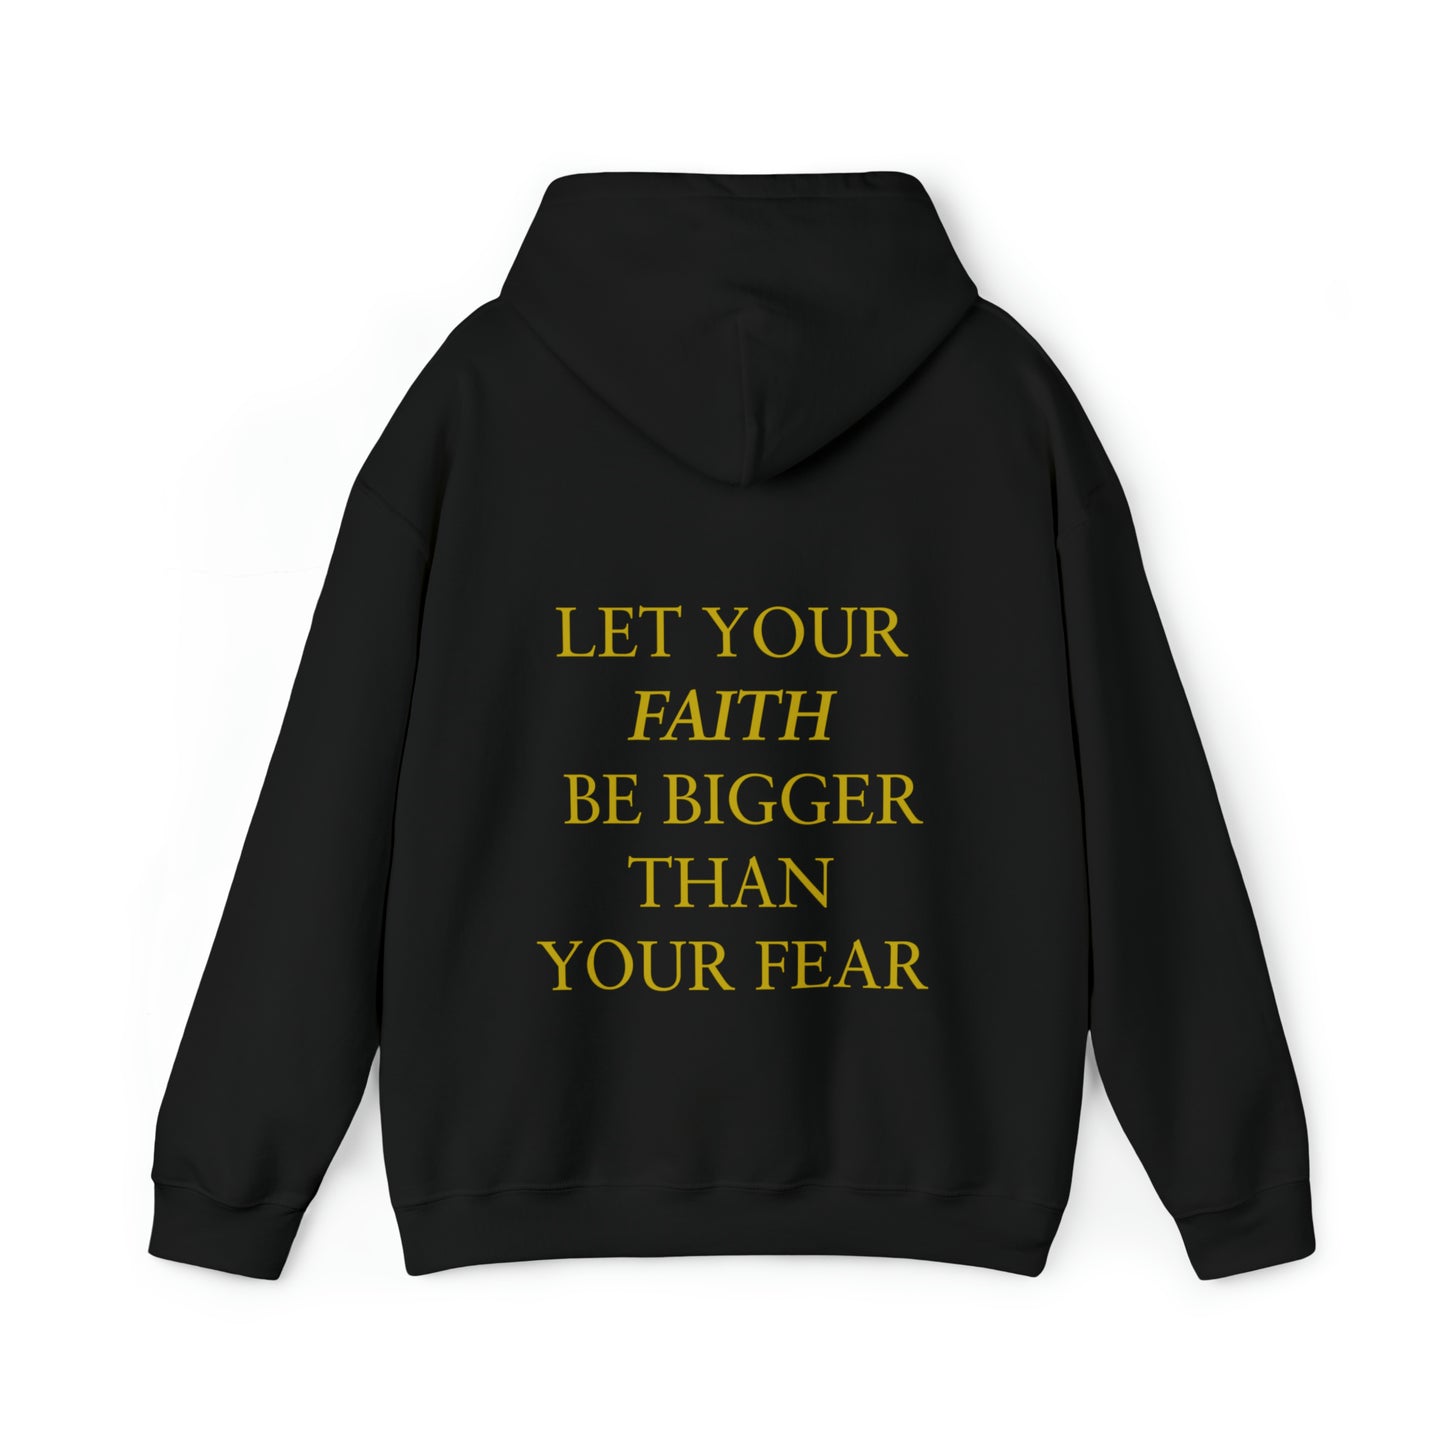 Tyler Wheaton: Let Your Faith Be Bigger Than Your Fear Hoodie